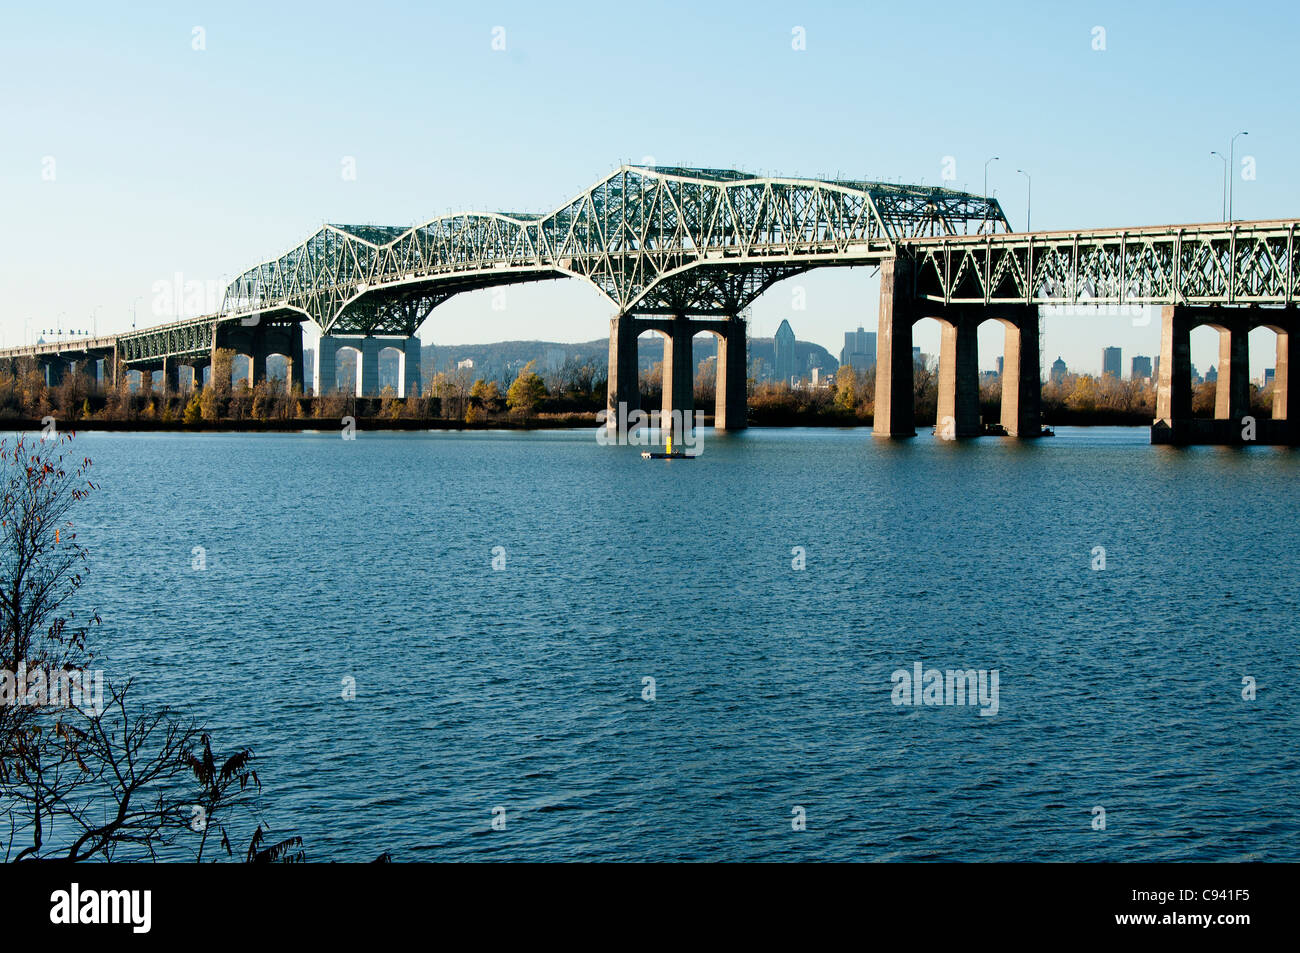 Champlain Bridge that crosses the St. Lawrence River linking Montreal to the American mainland. Stock Photo